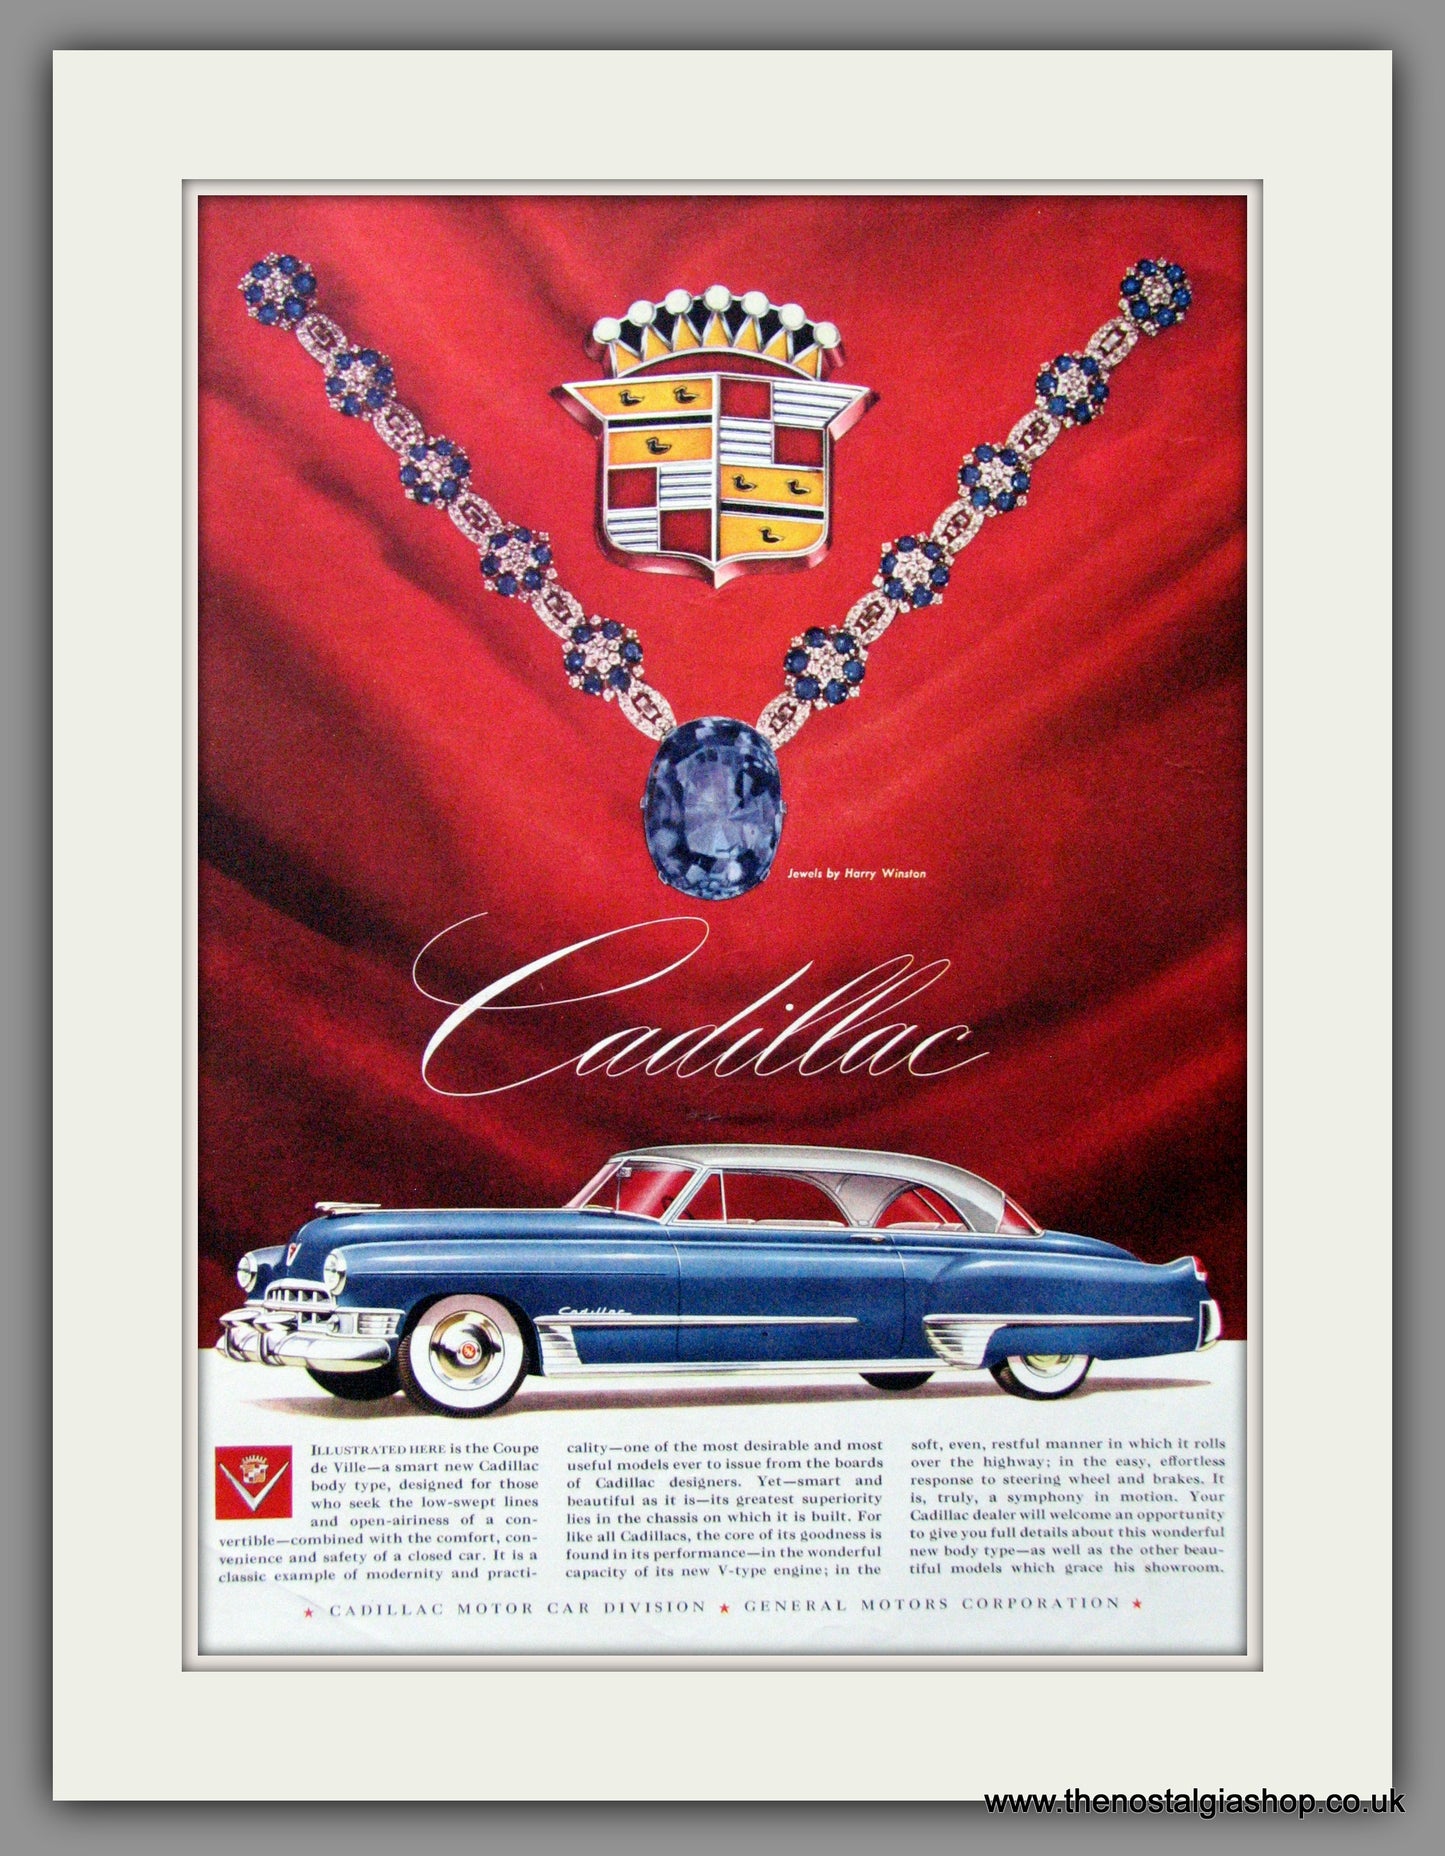 Cadillac 1949 with Jewels by Harry Winston. Original American Advert (ref AD52200)